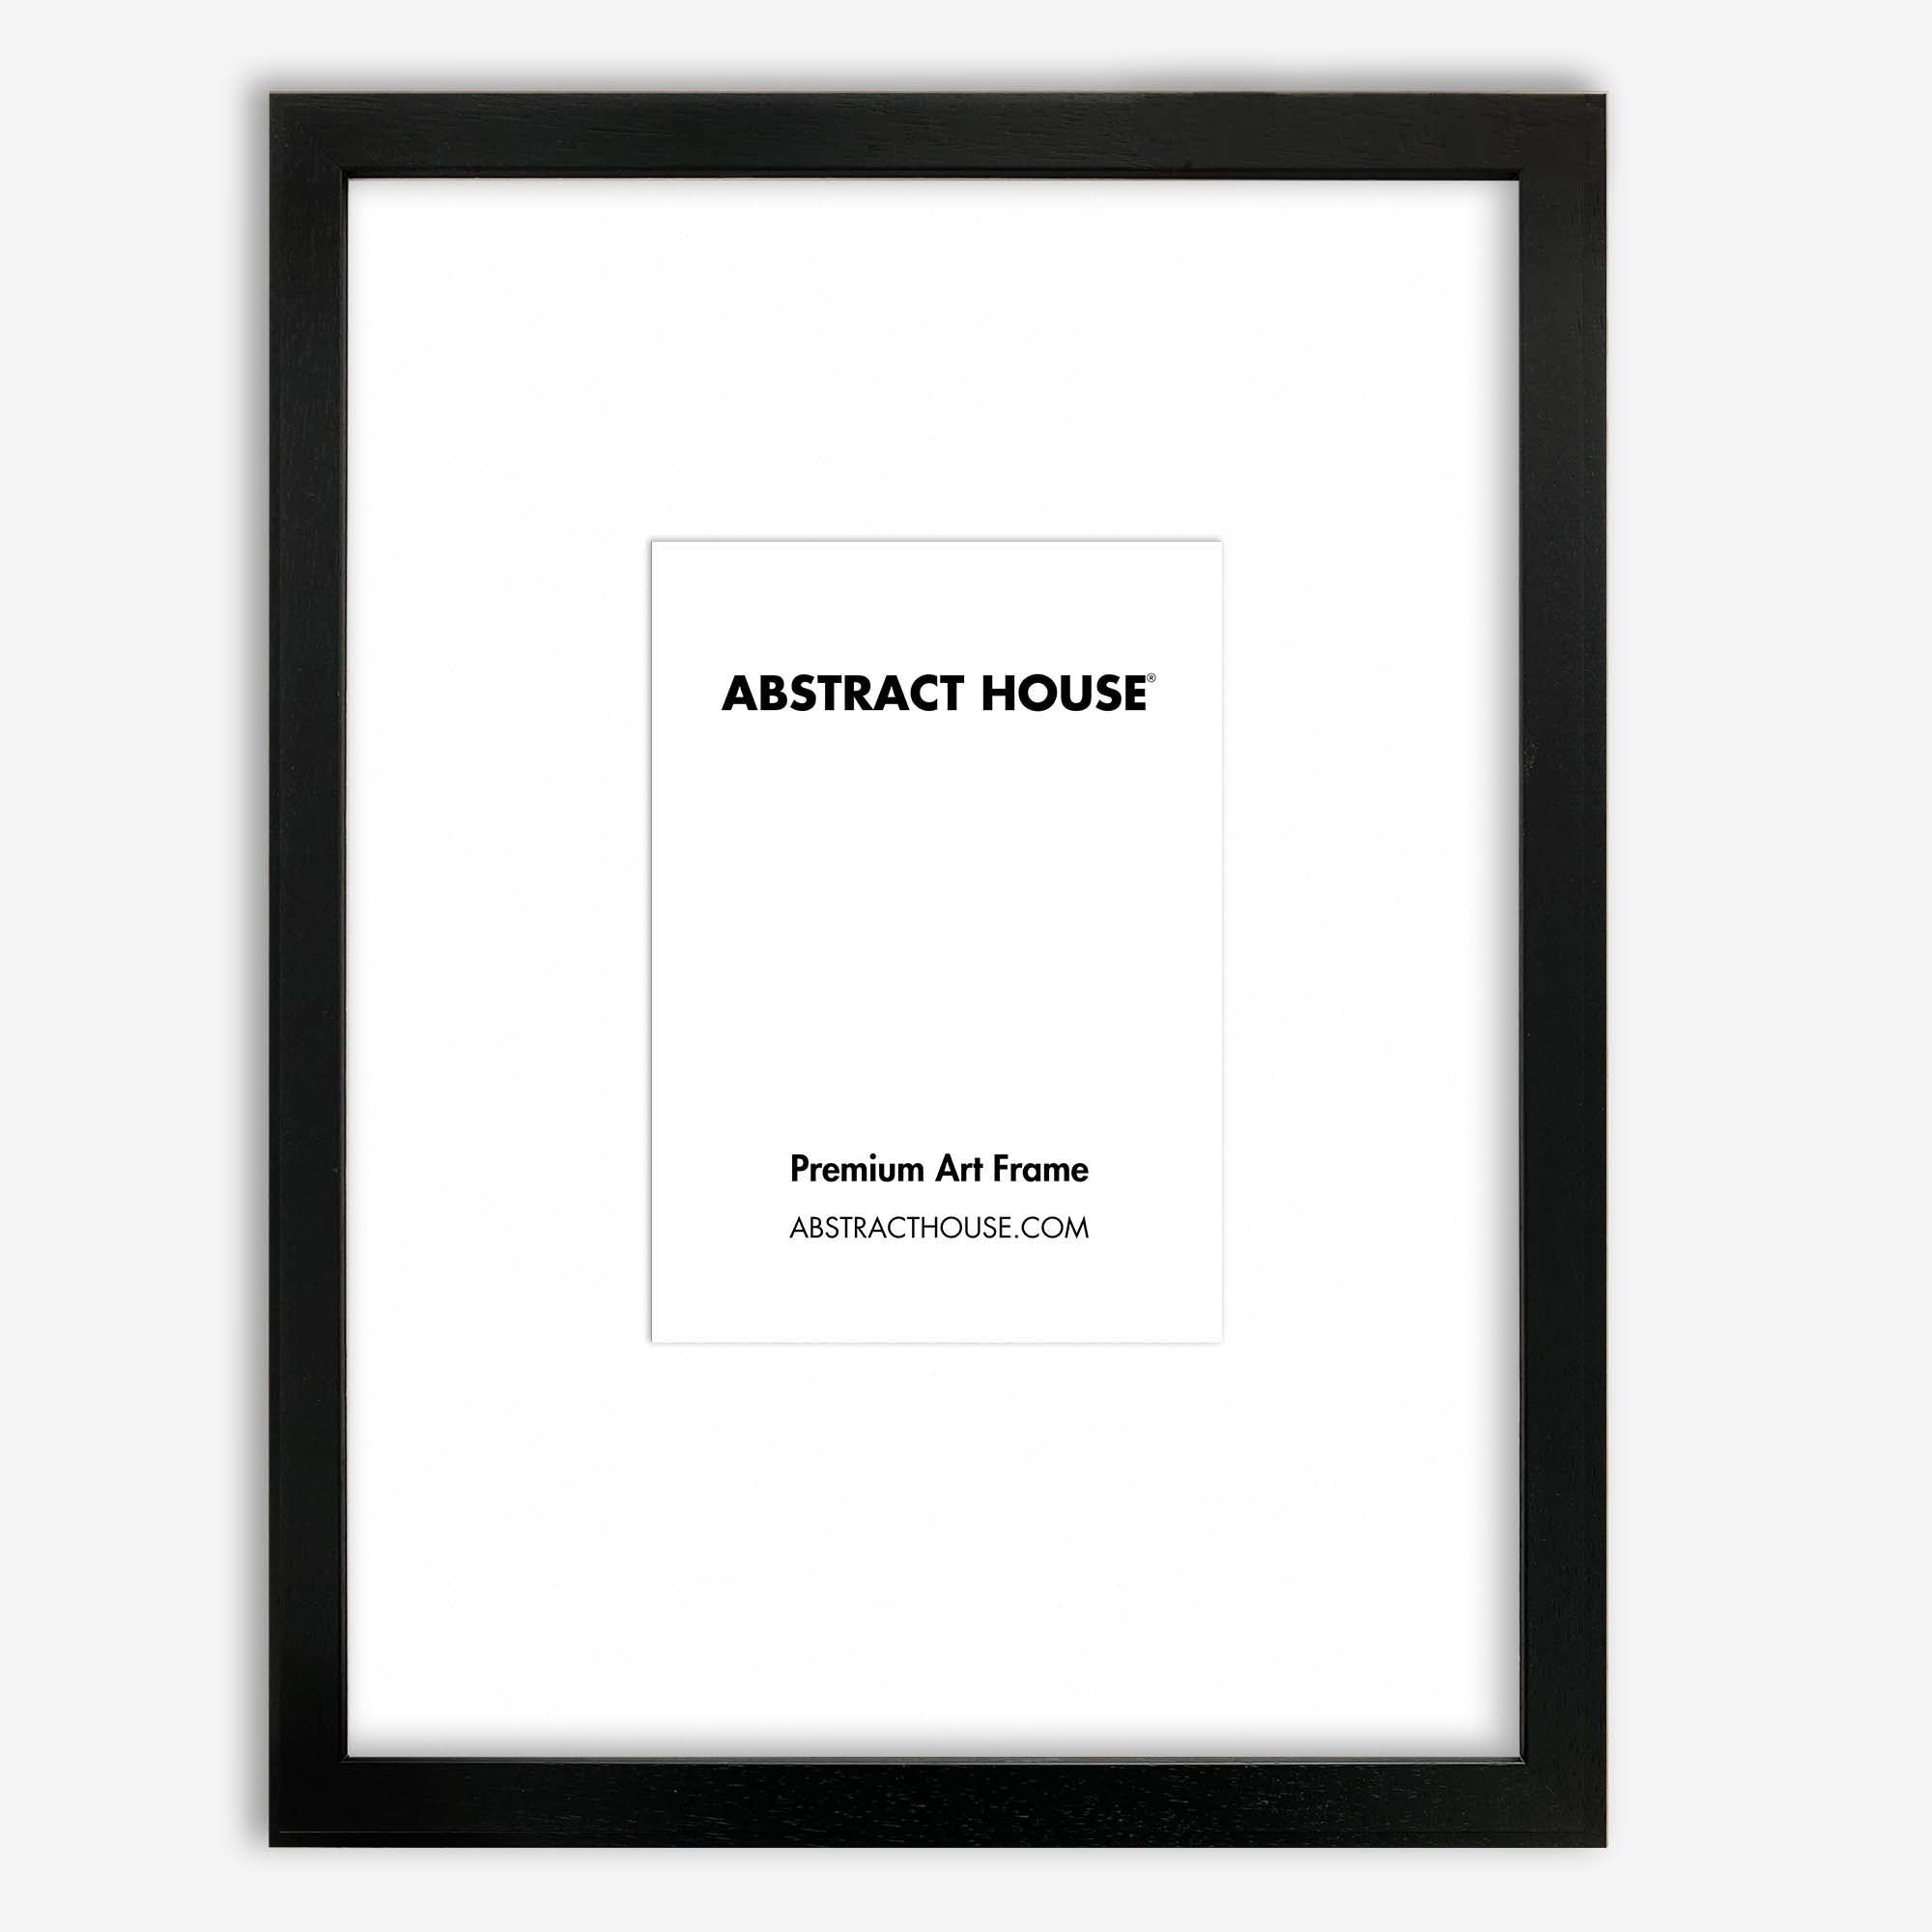 30x40cm Wooden Picture Frame-Black-A5 14.8 x 21 cm-Abstract House